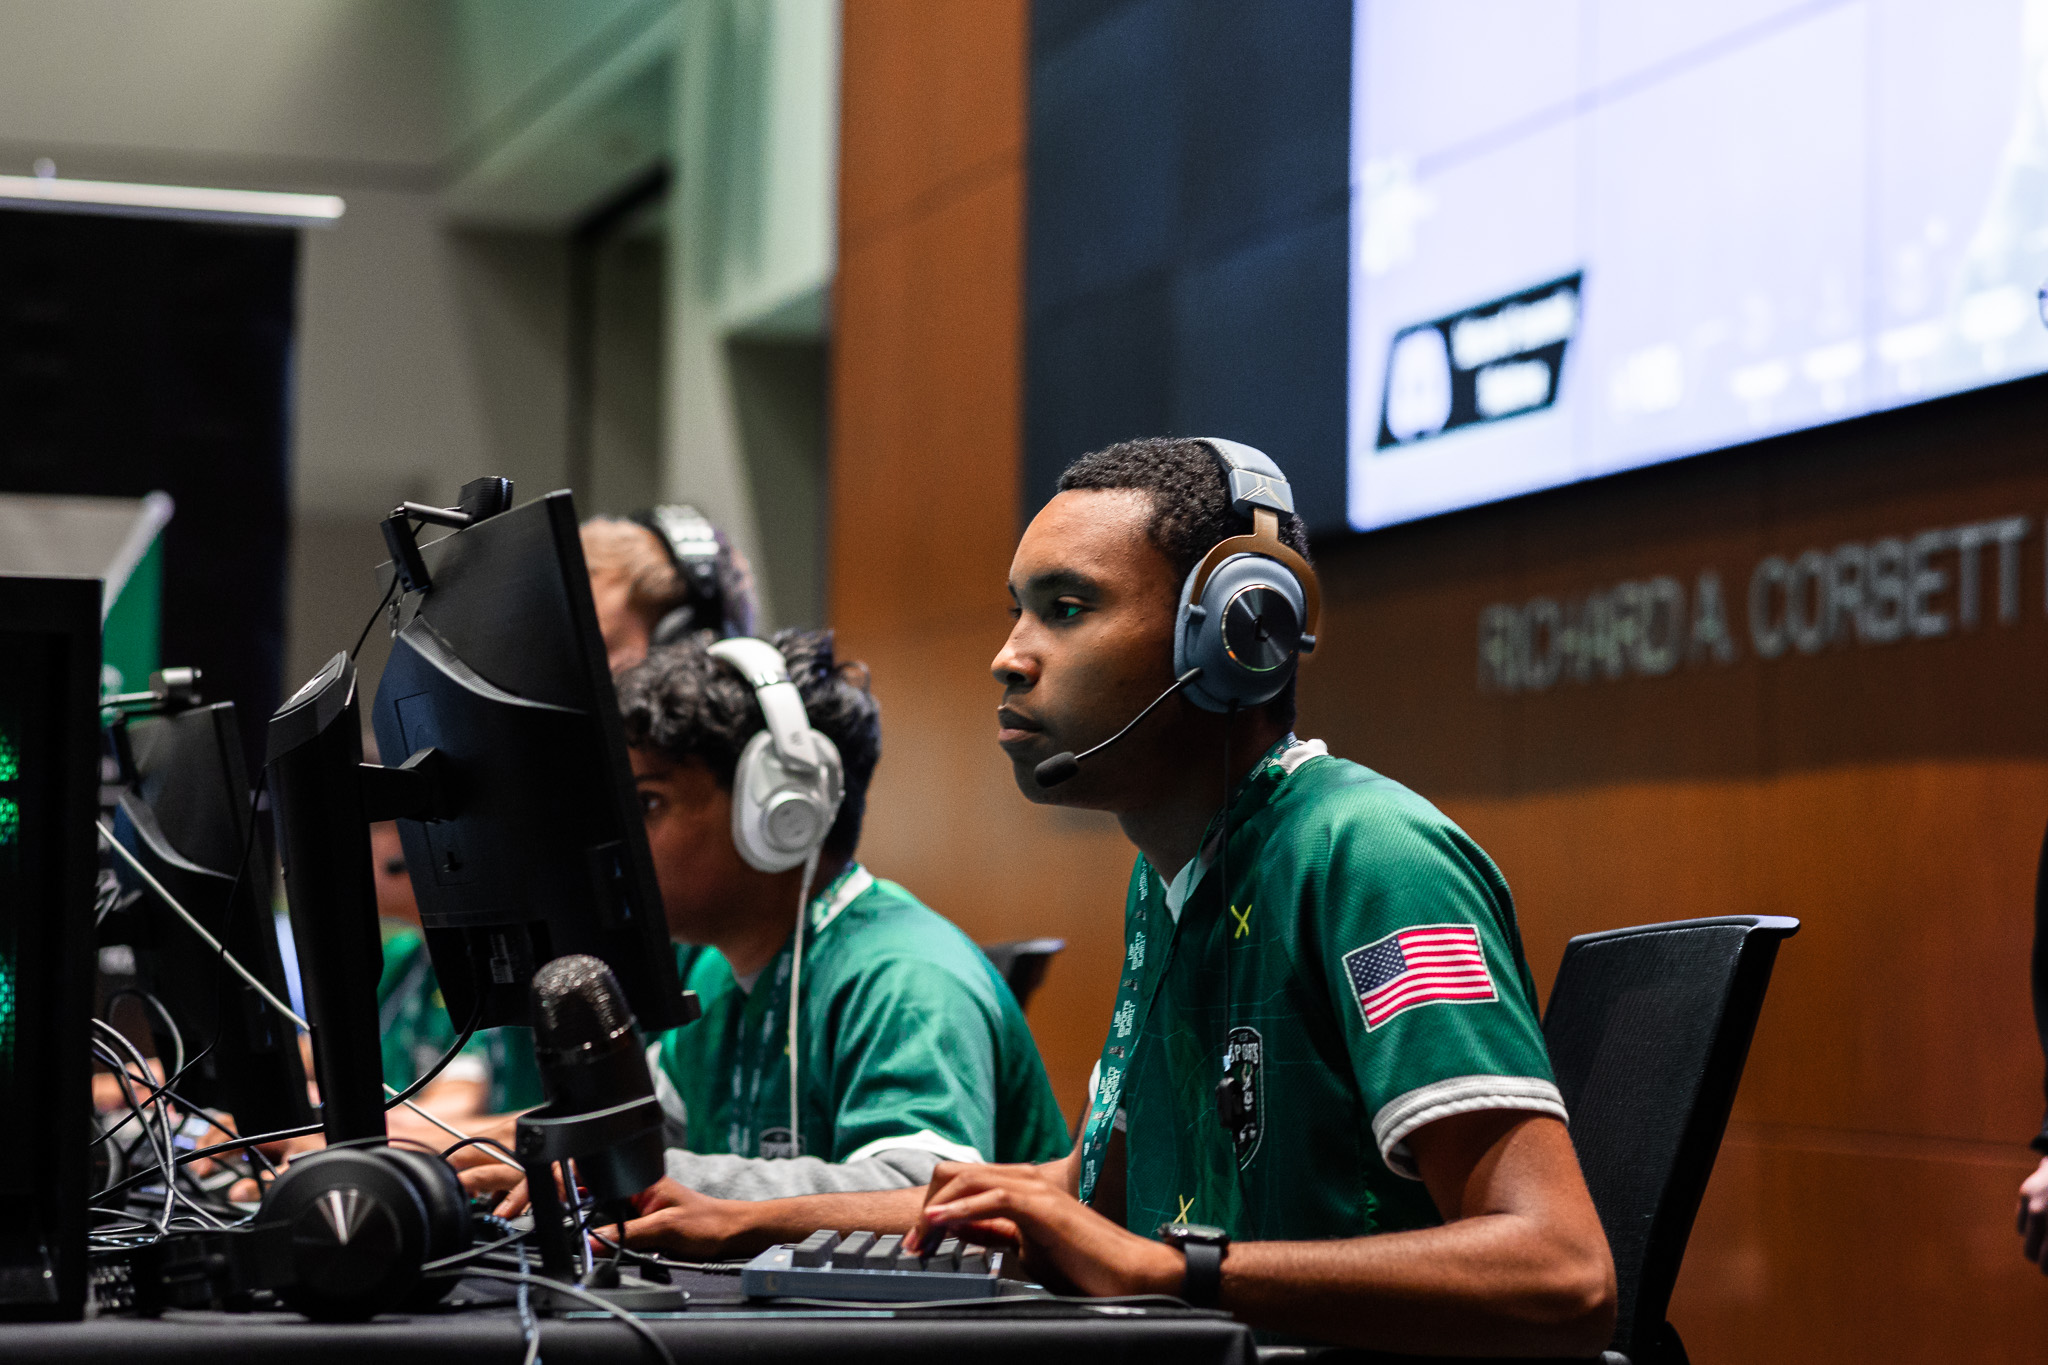 USF students participating in a video game competition during an esports event.